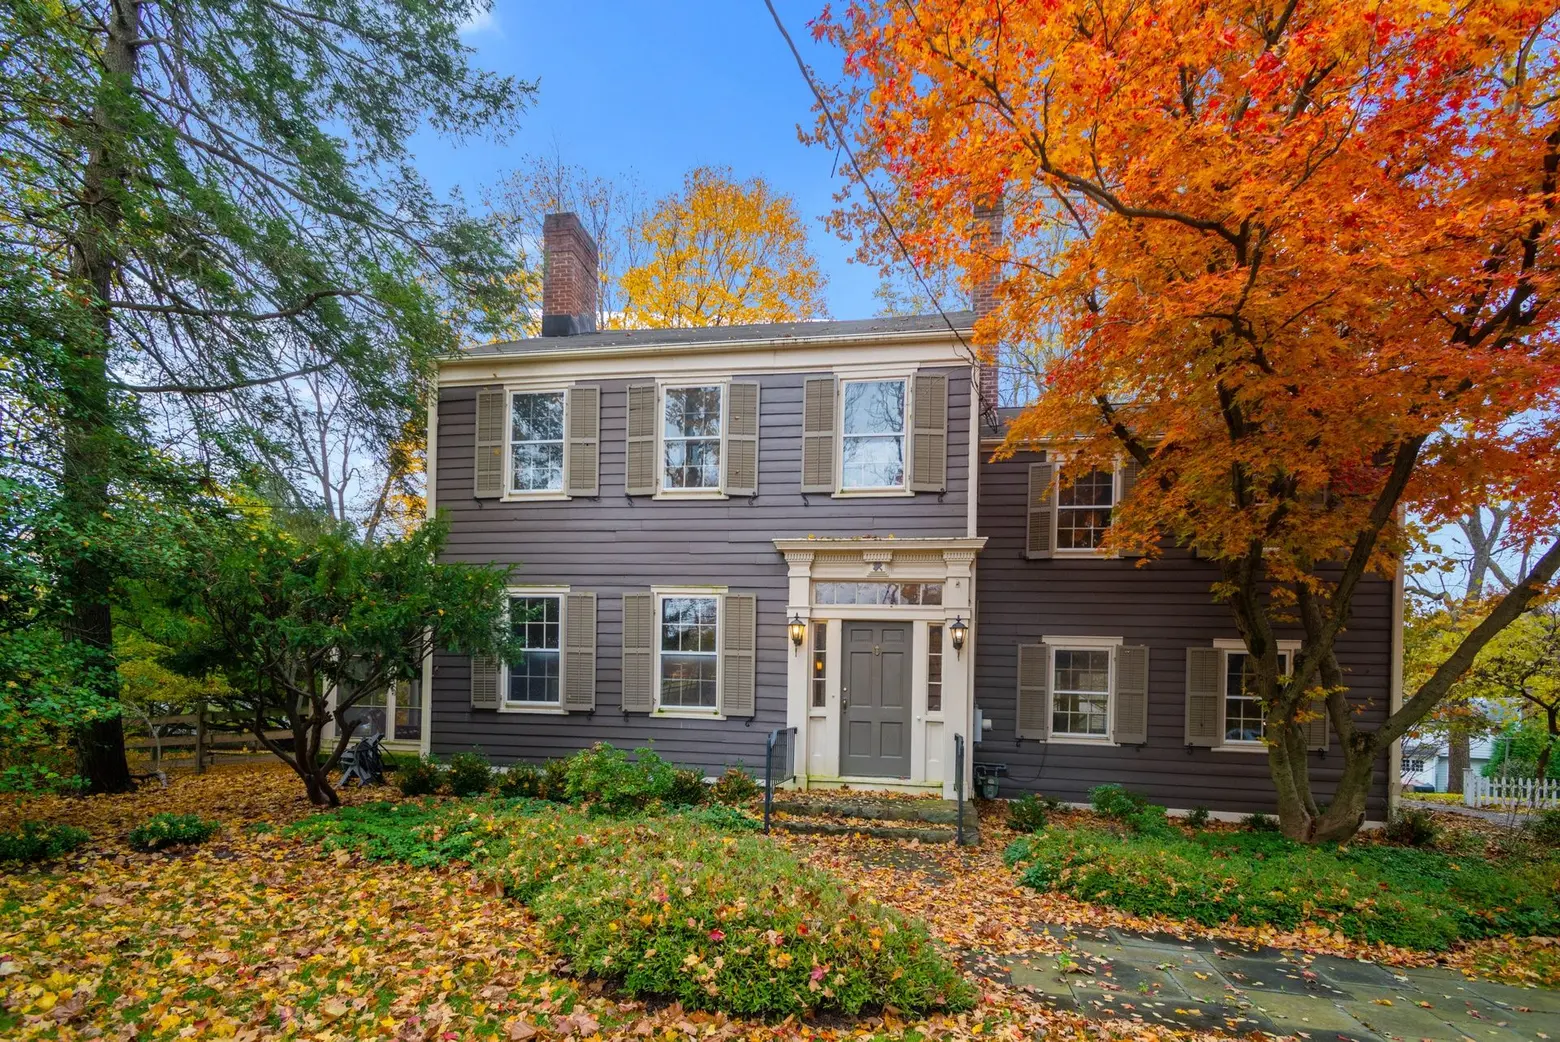 300-year-old New Jersey home that once hosted George Washington asks $795K